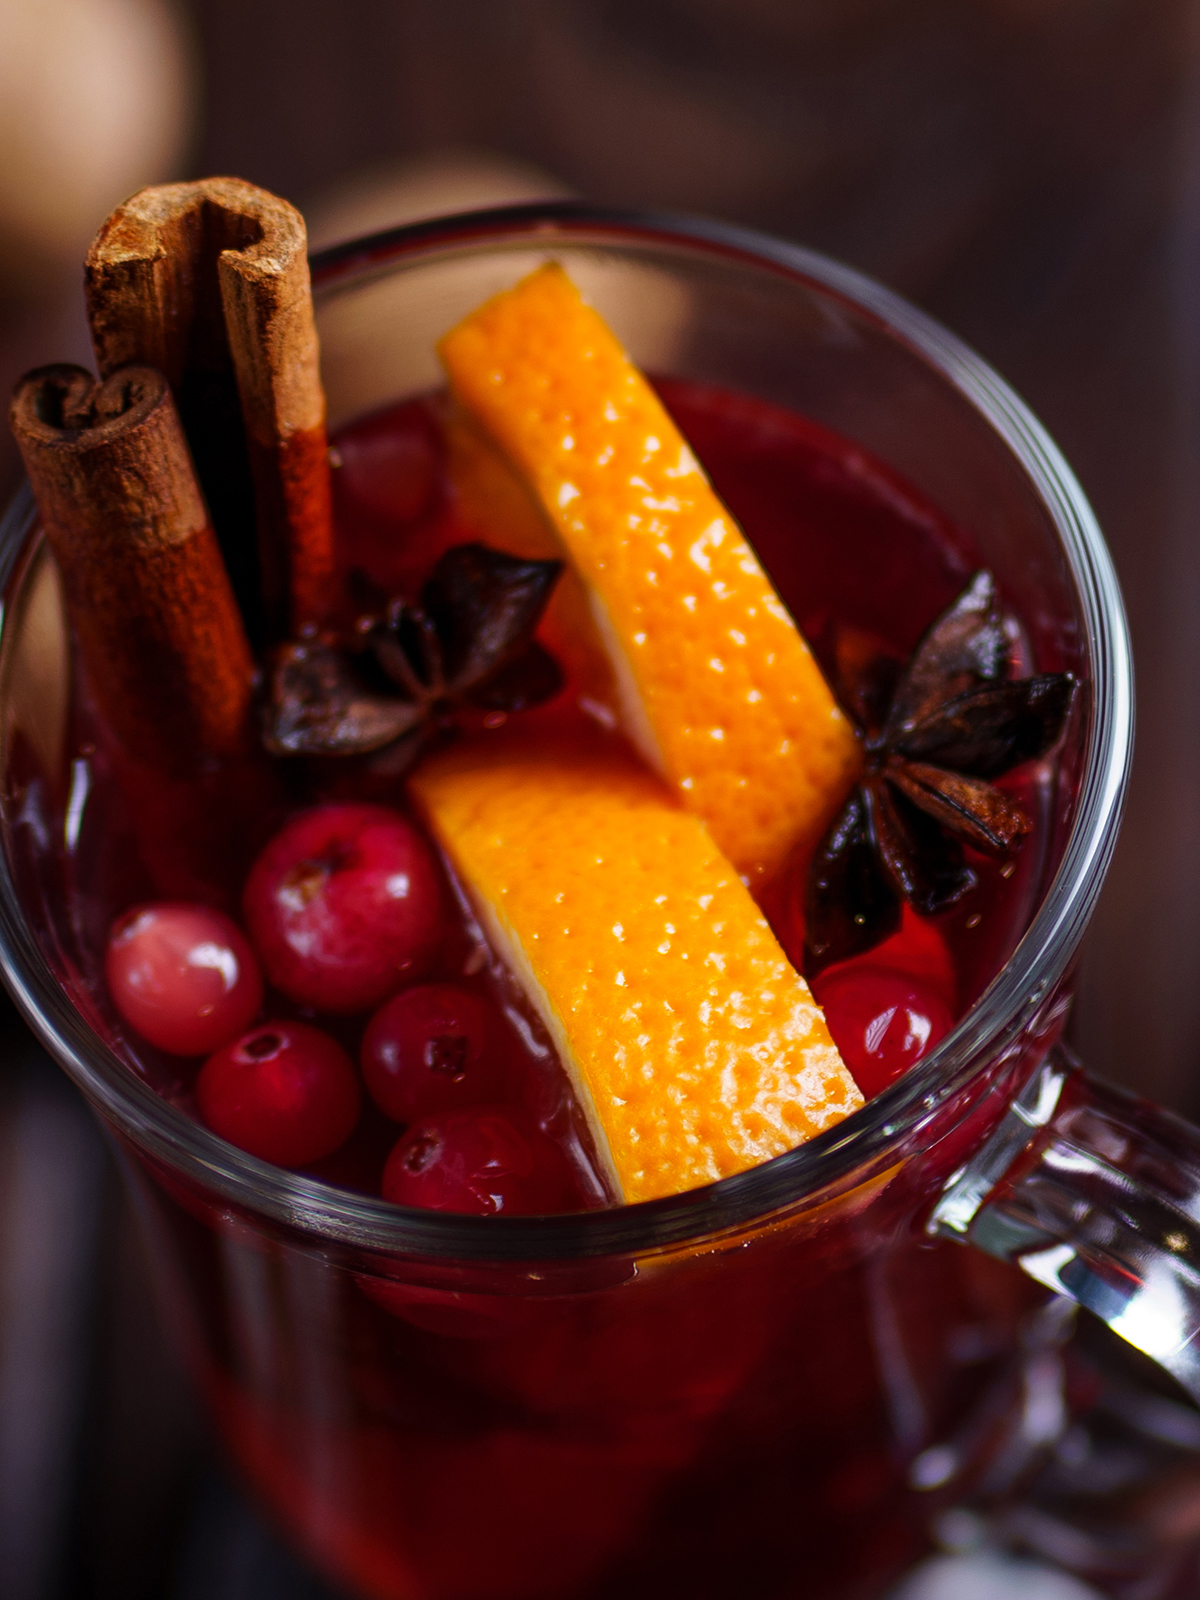 Cranberry punch - Spiced Cranberry Punch recipe